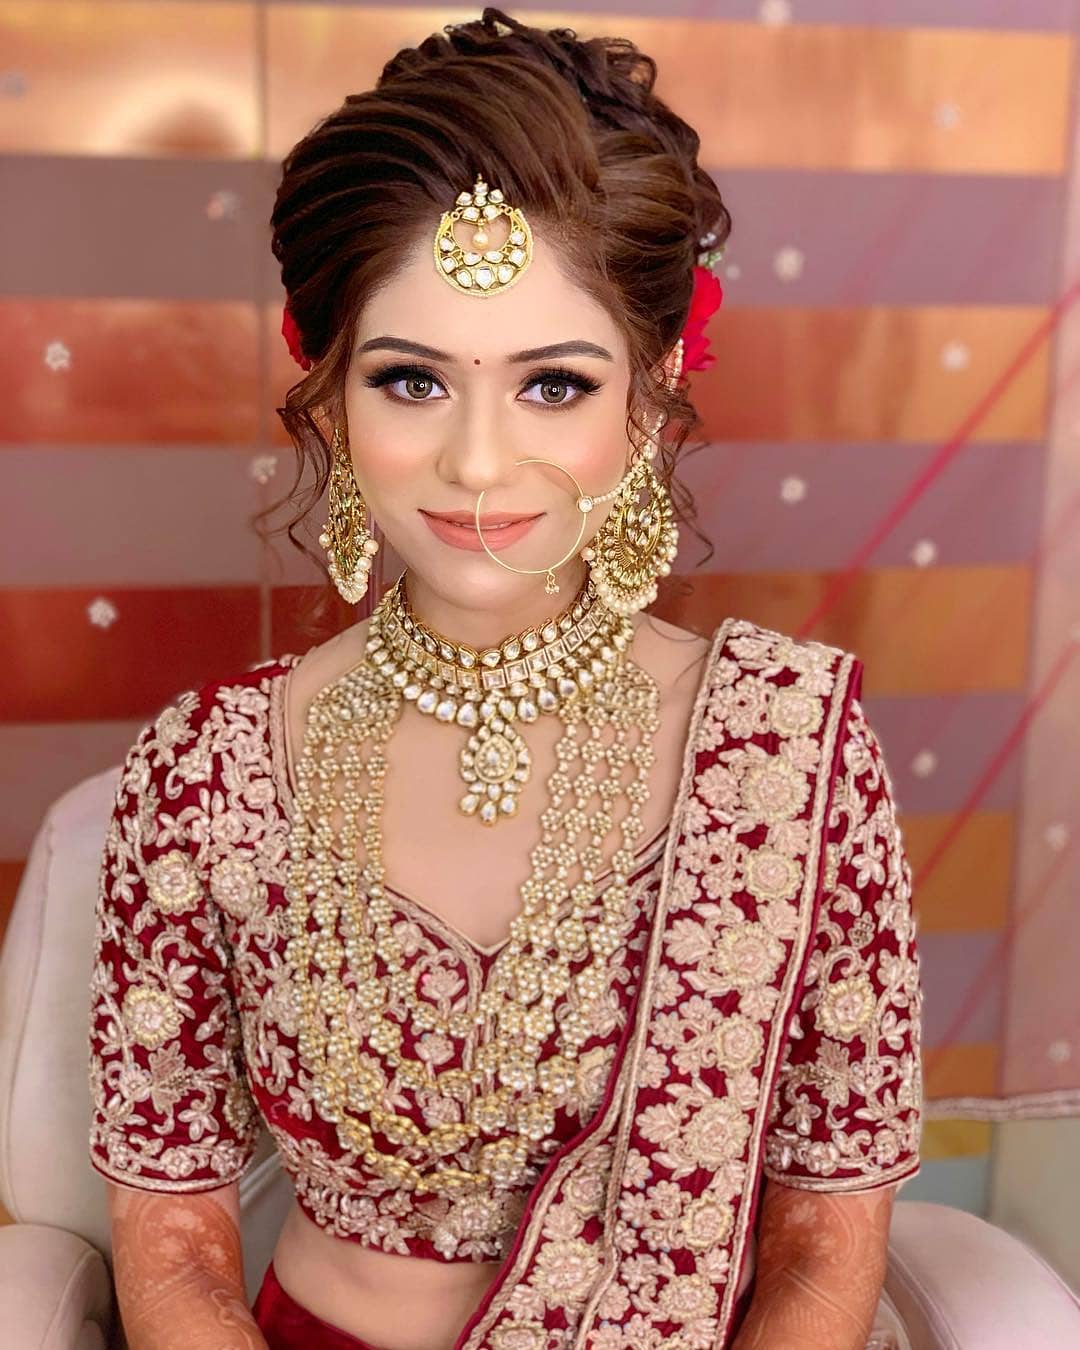 Peach magic: Best Bridal Makeup Inspirations to bring out Diva in You